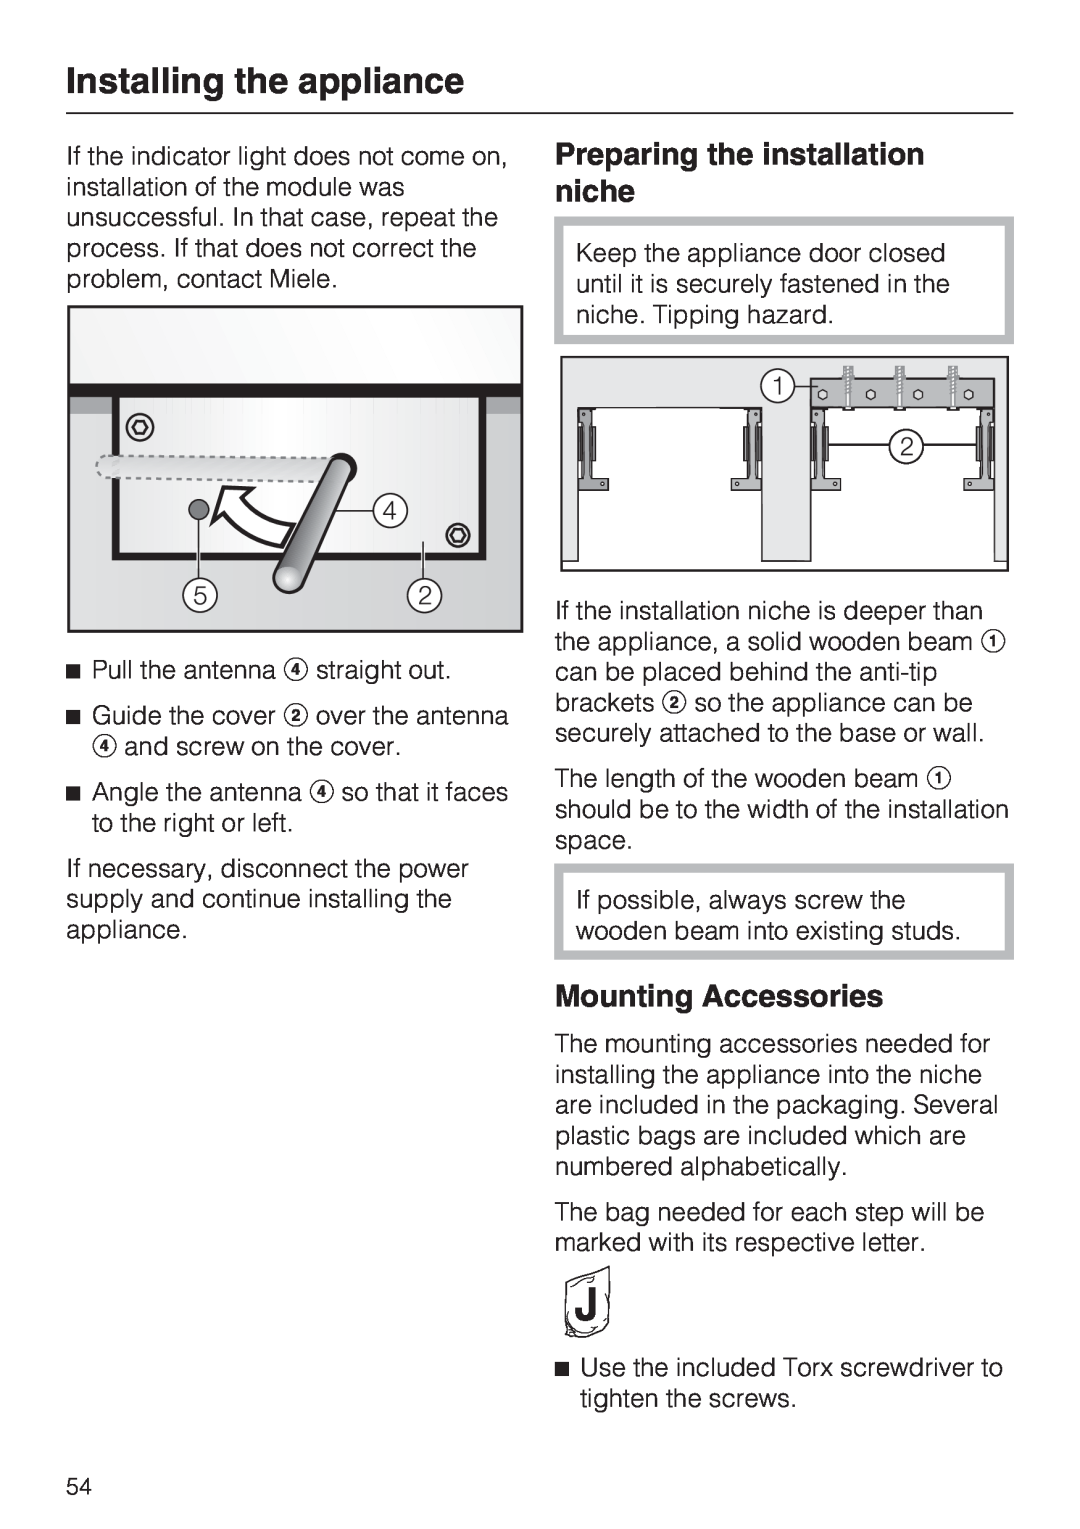 Miele F1411VI installation instructions Preparing the installation niche, Mounting Accessories, Installing the appliance 